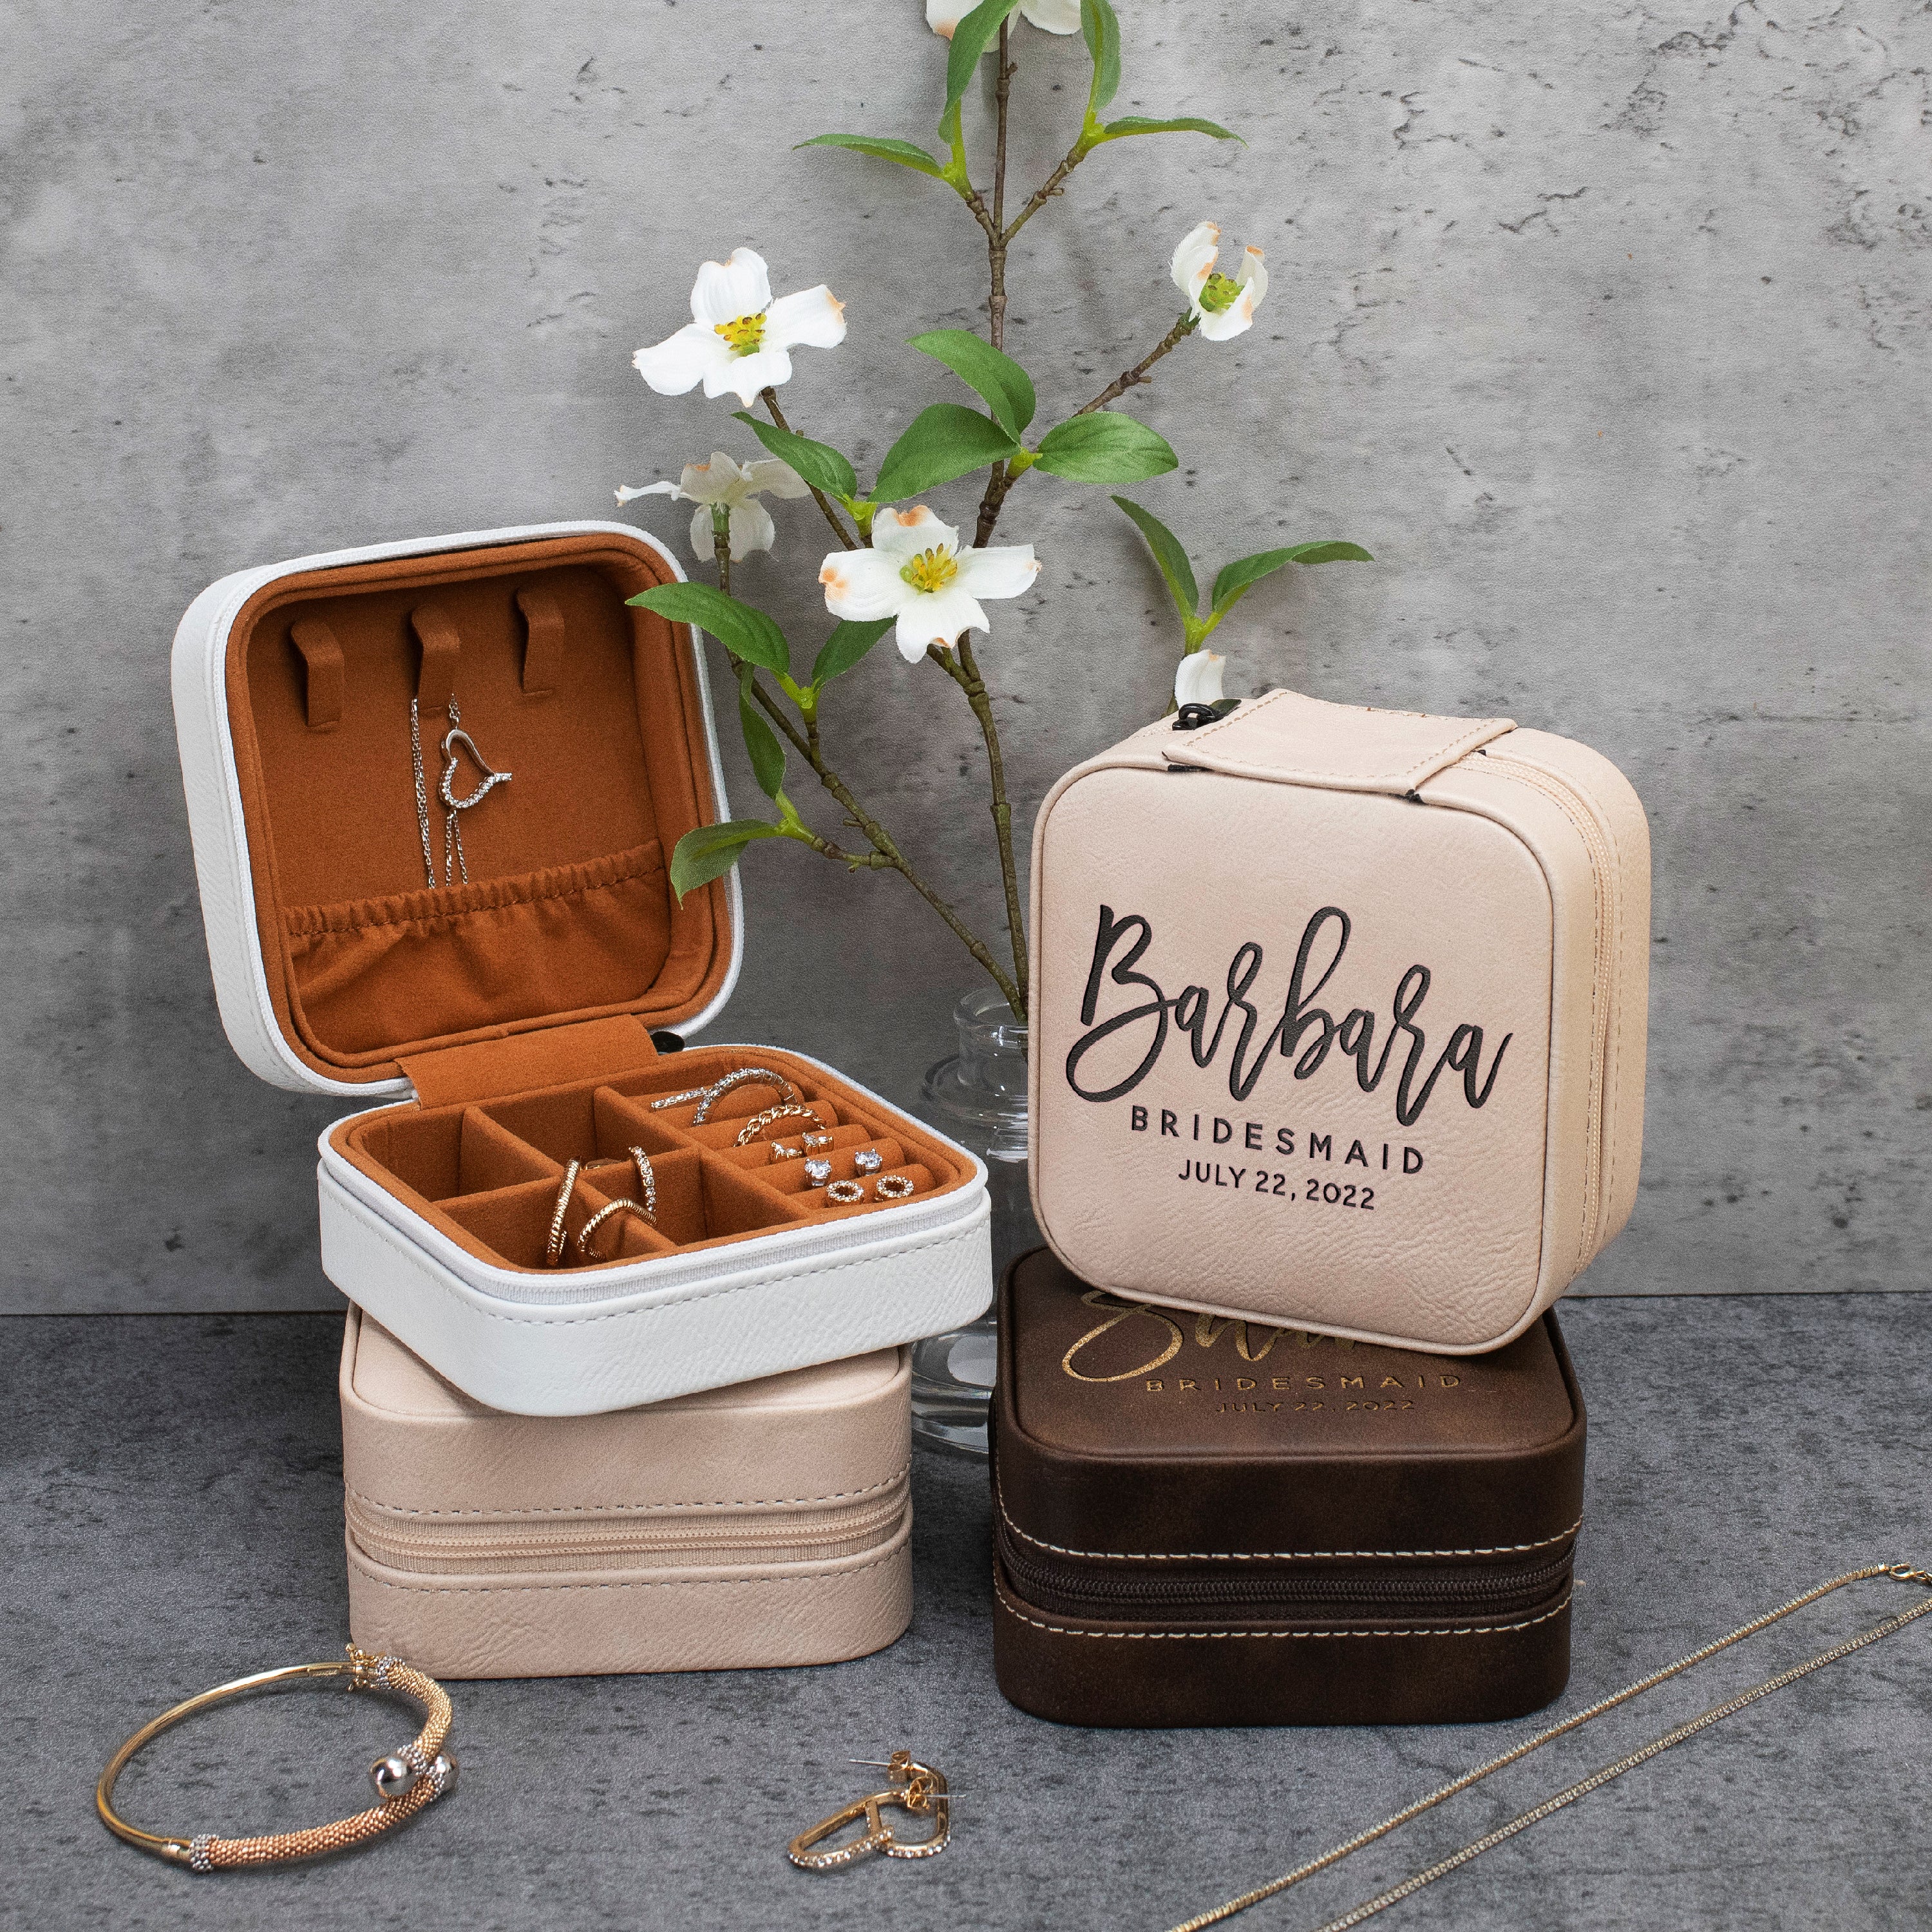 Bridesmaid Proposal Gifts Custom Leather Jewelry Box, Birth Flower Travel  Jewelry Case Ring Box, Per…See more Bridesmaid Proposal Gifts Custom  Leather